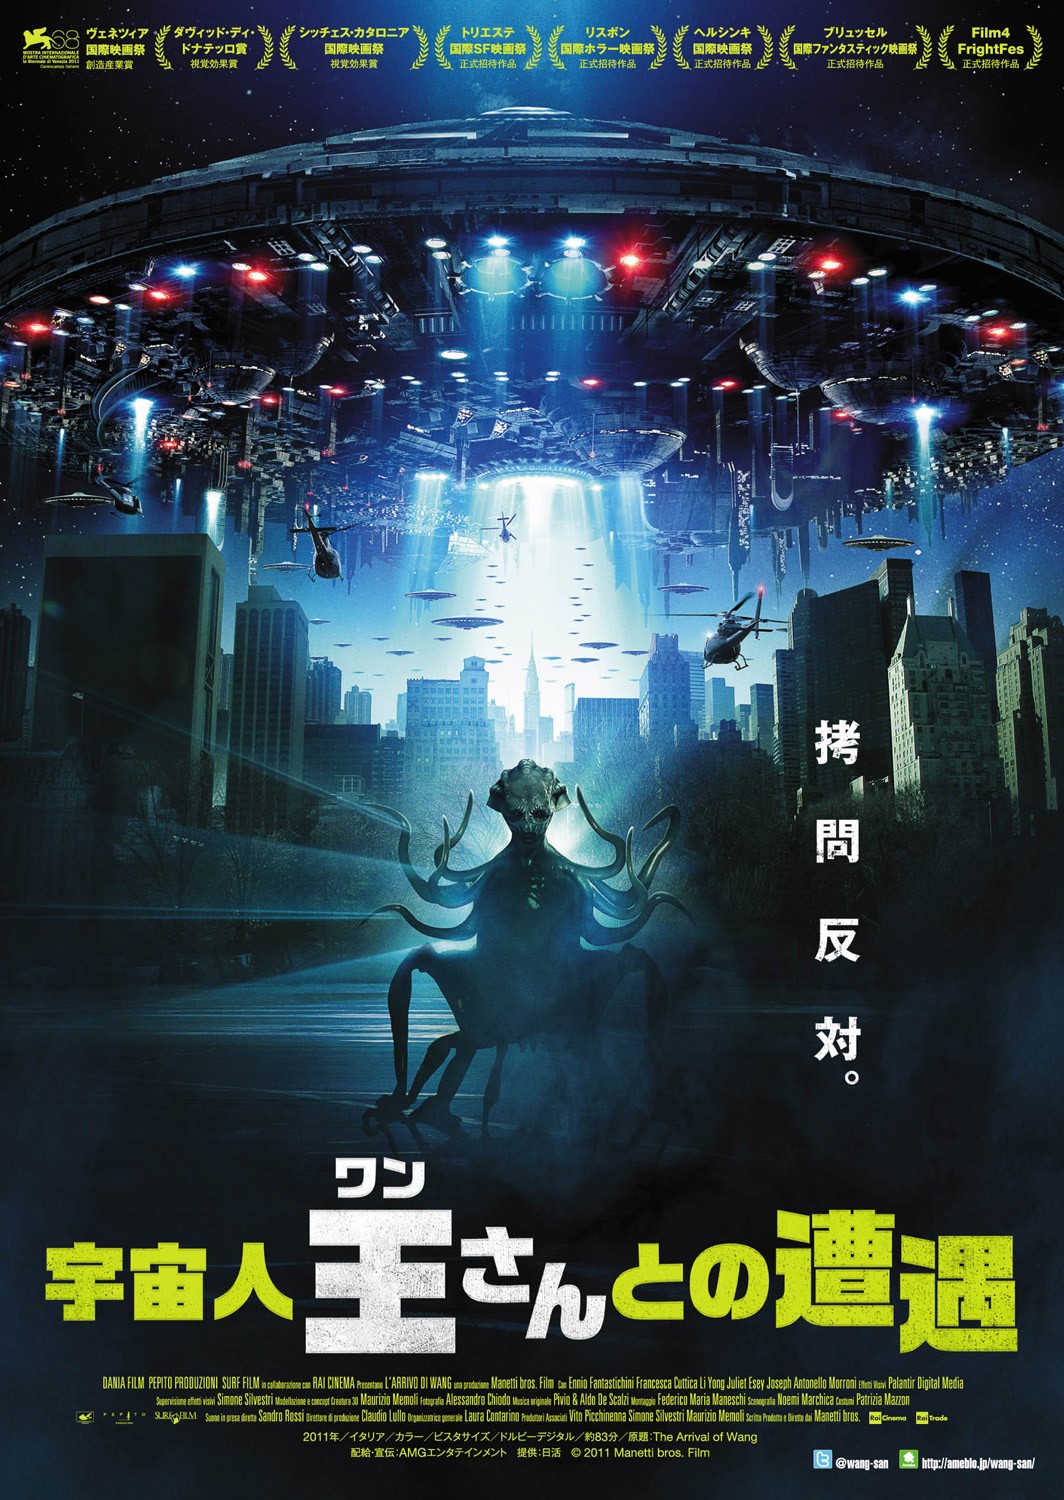 Extra Large Movie Poster Image for L'arrivo di Wang 